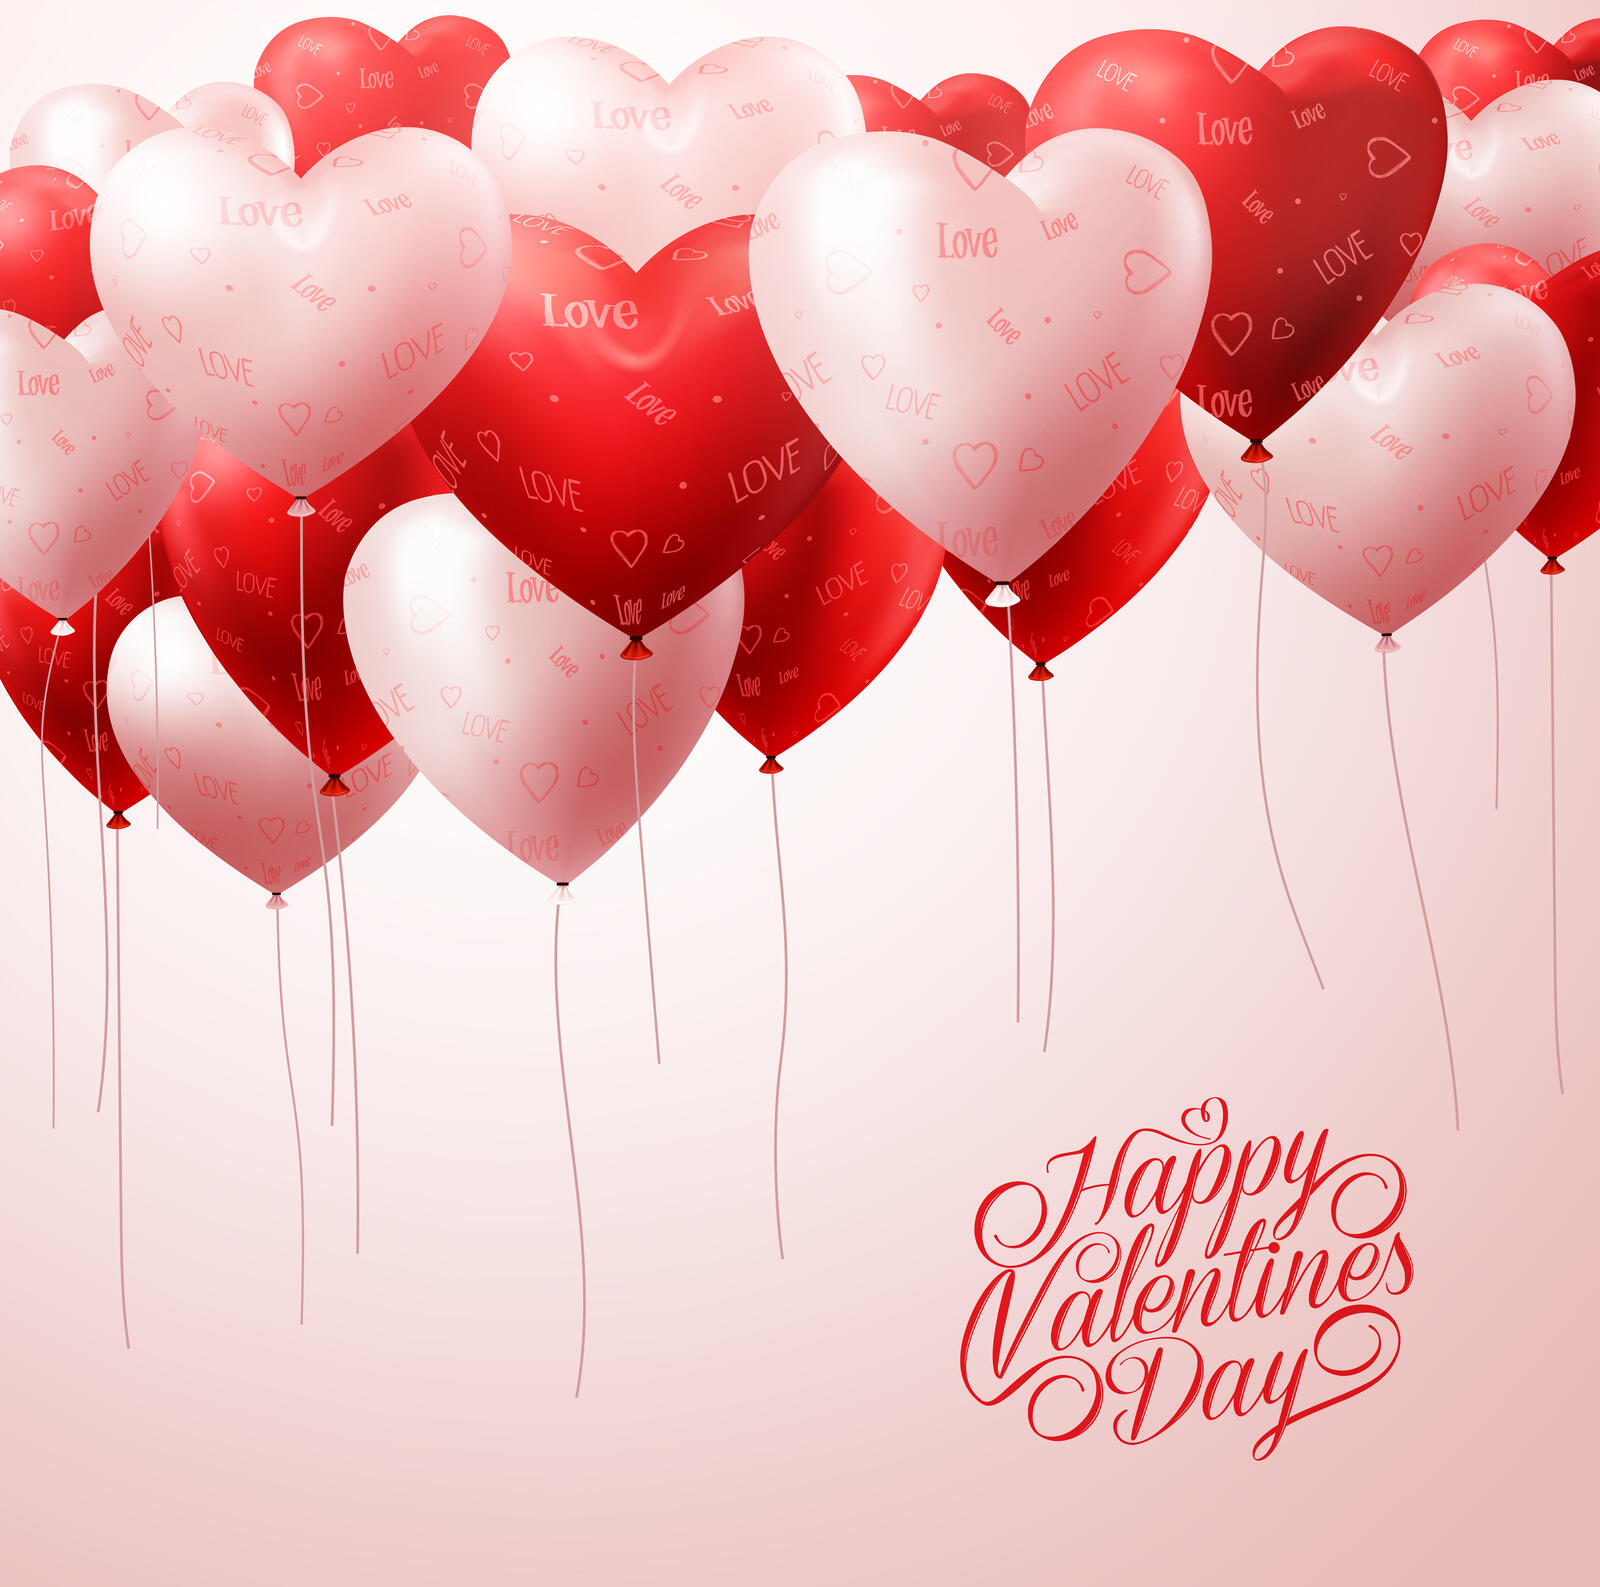 Wallpapers happy valentine`s day text romantic hearts on the desktop